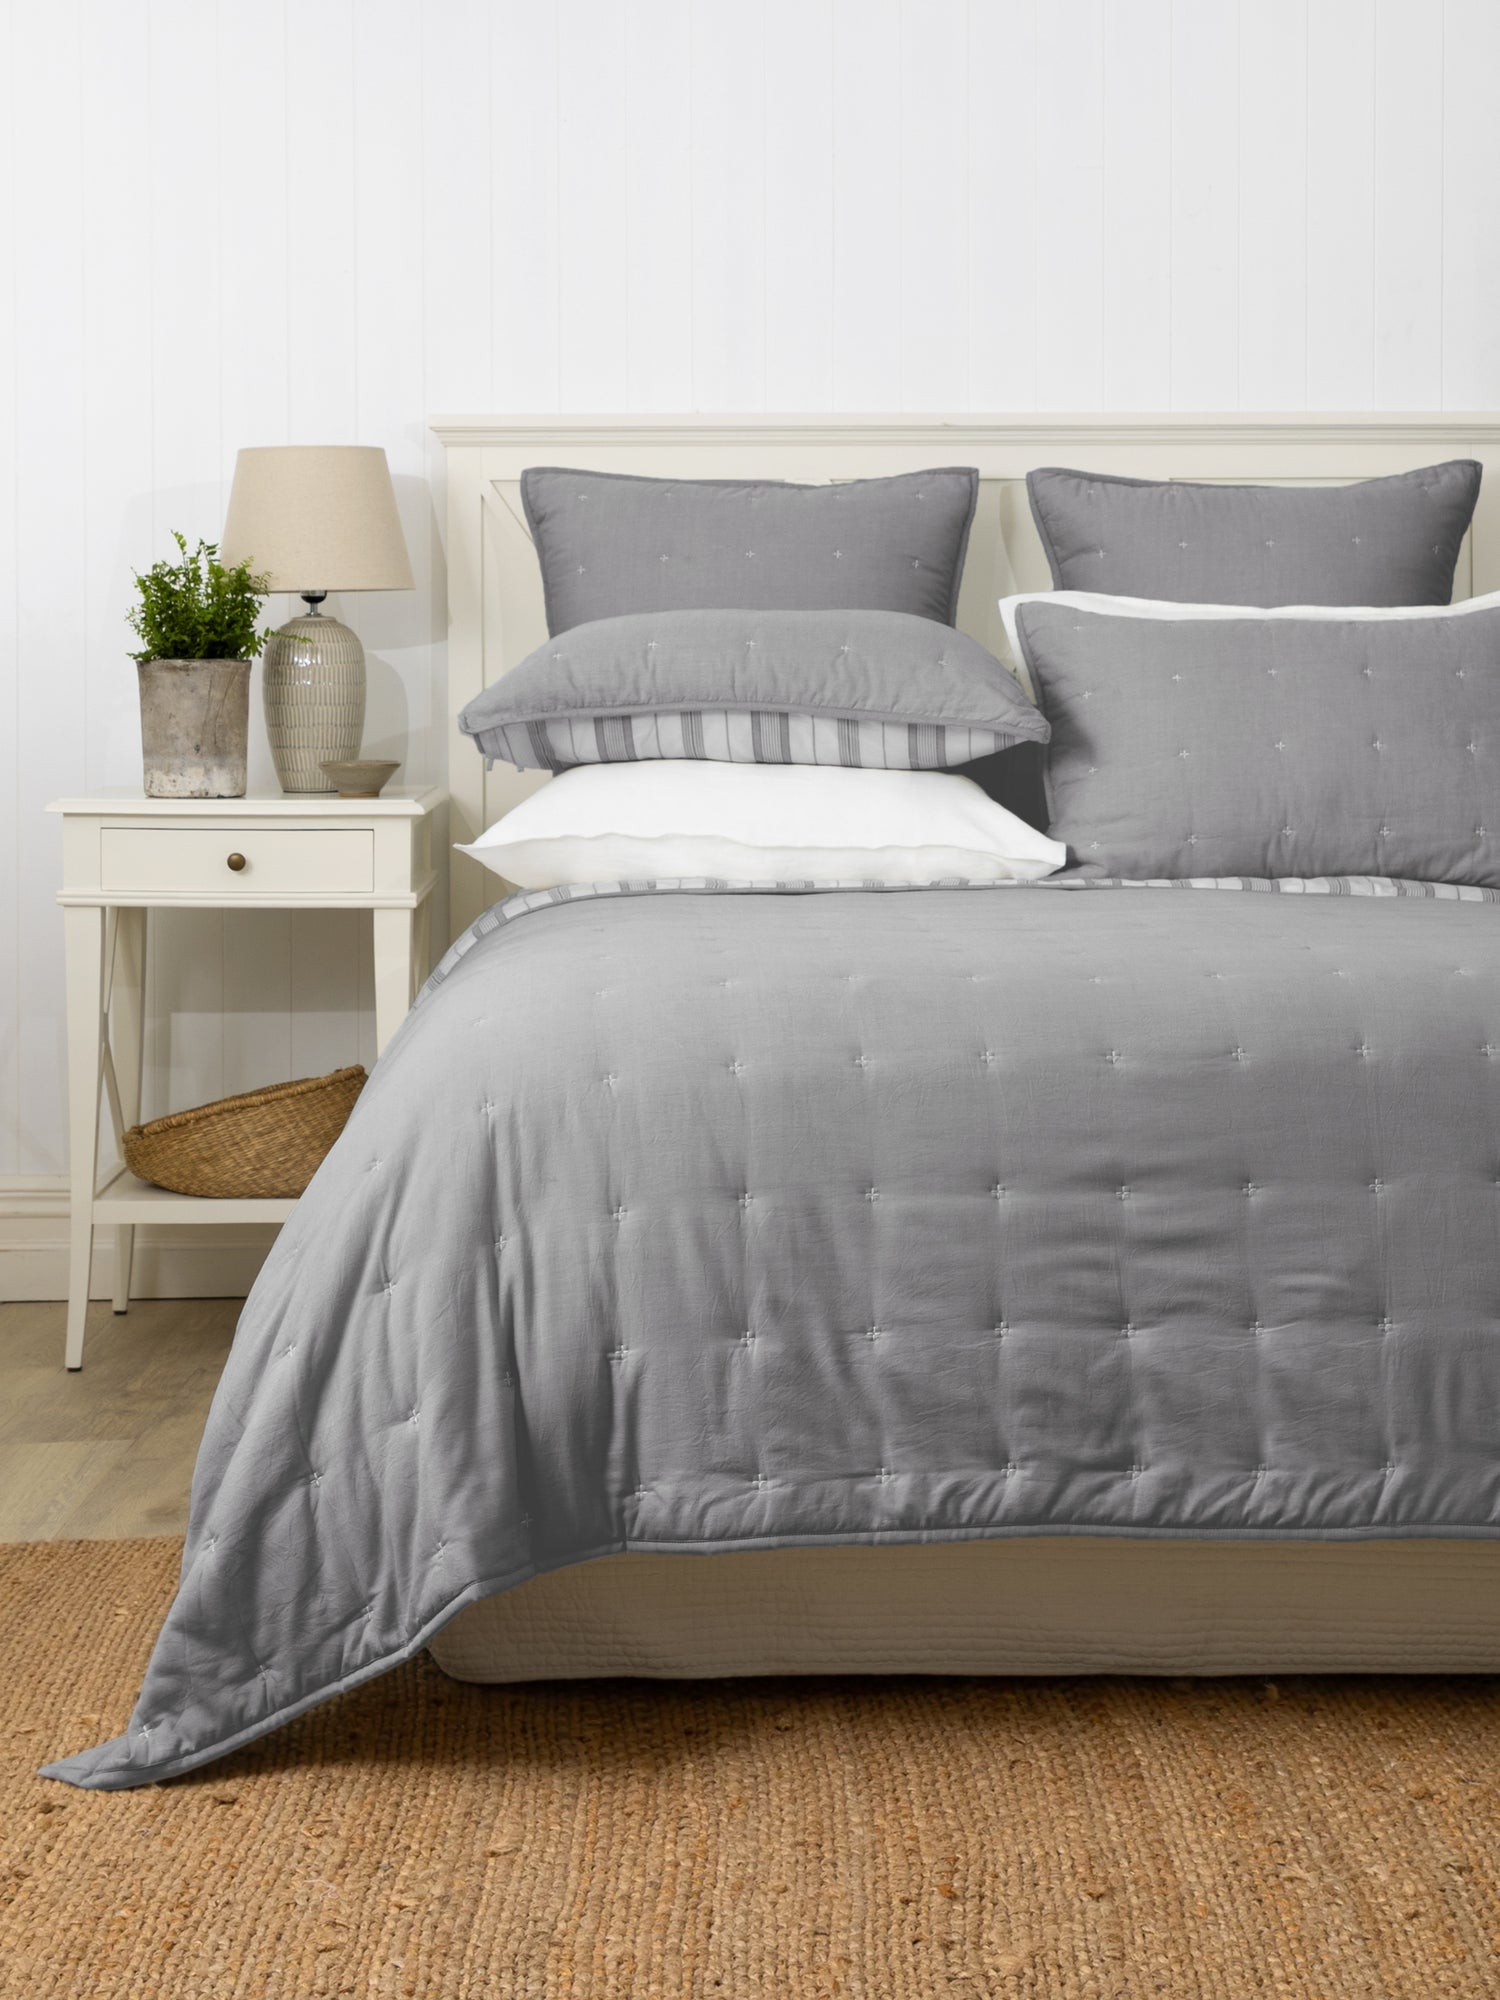 https://www.wallacecotton.com/content/products/prairie-chambray-quilt-charcoal-1-9069.jpg?width=1500